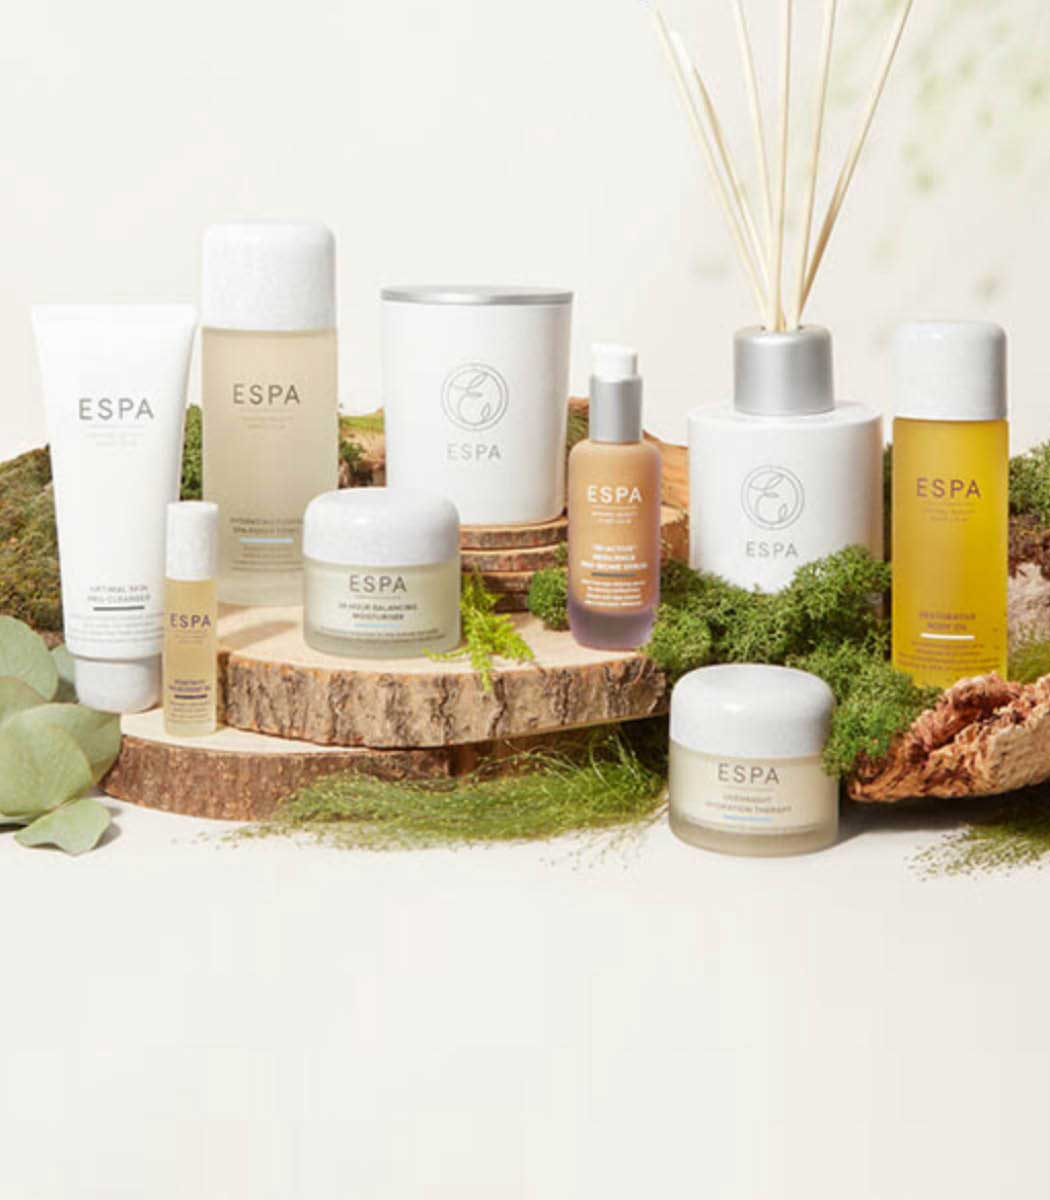 ESPA's products are luxurious and feature natural ingredients